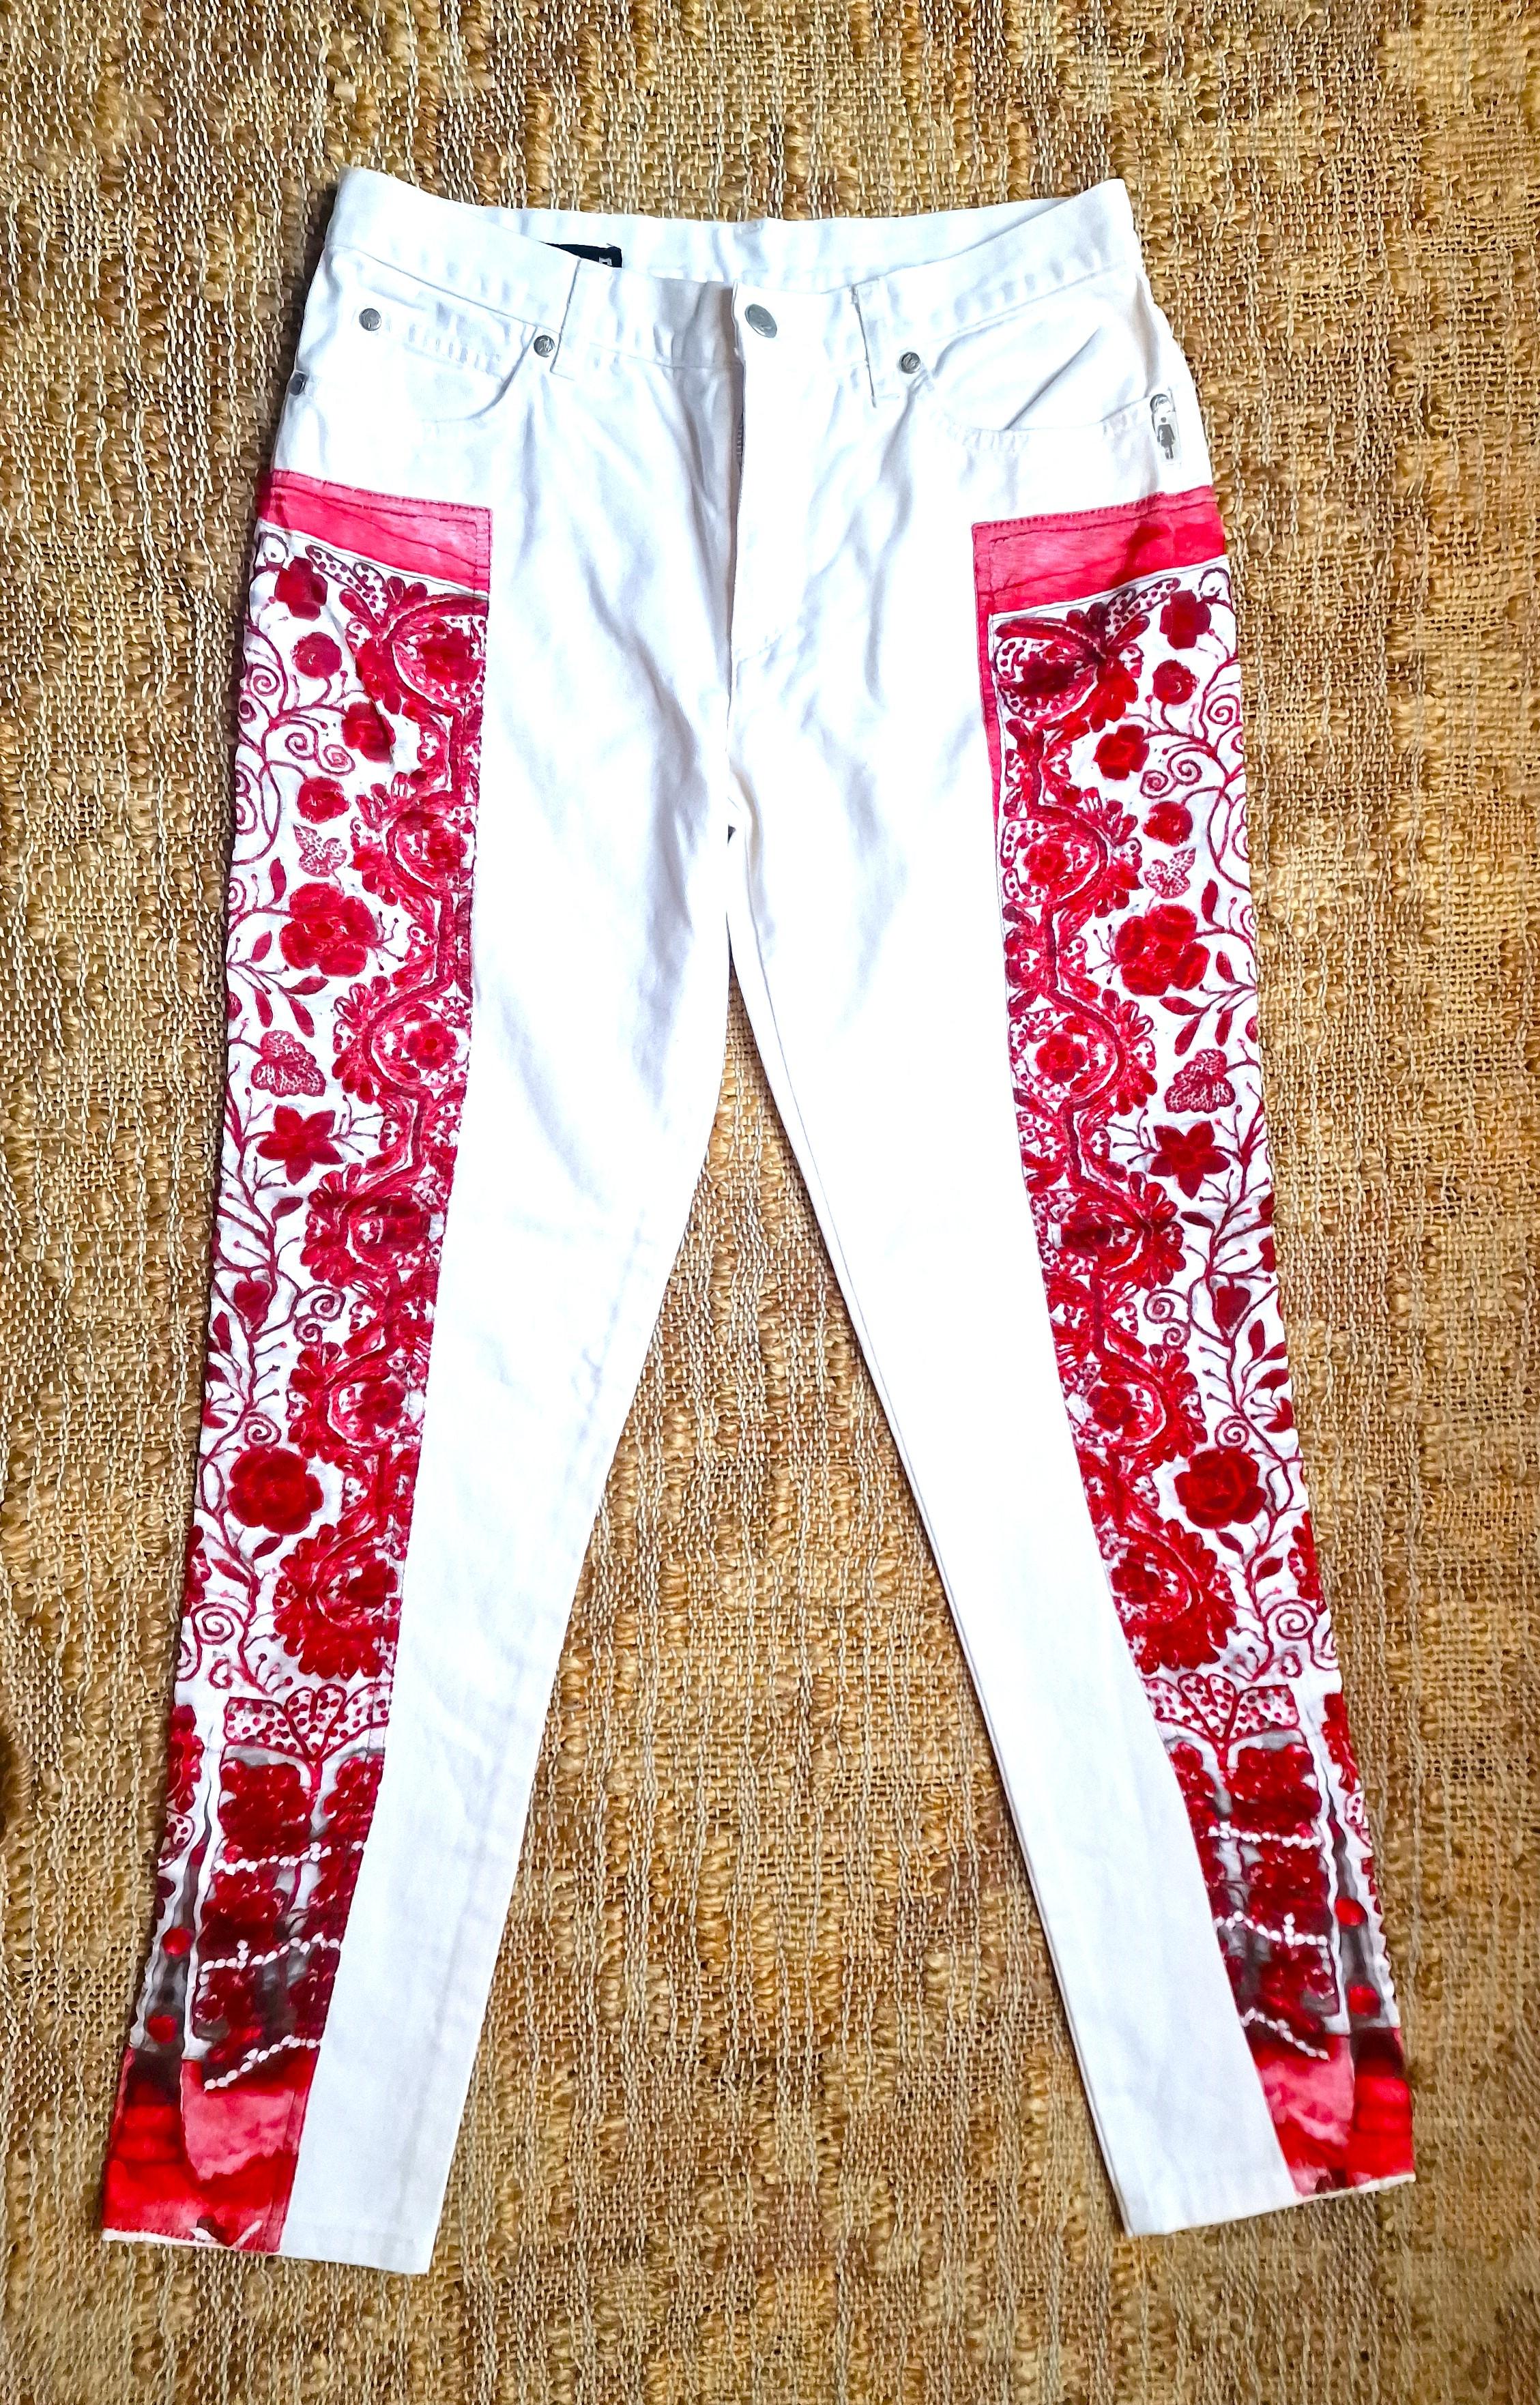 Optical illusion pants by Jean Paul Gaultier.
The pattern is on silk fabric!
It look you wear an embroidered pants.
JPG metal buttos.
*JPG BY GAULTIER* tab on the back.

EXCELLENT condition!

SIZE
Medium
Makred size: 28.
Length: 96 cm / 37.8